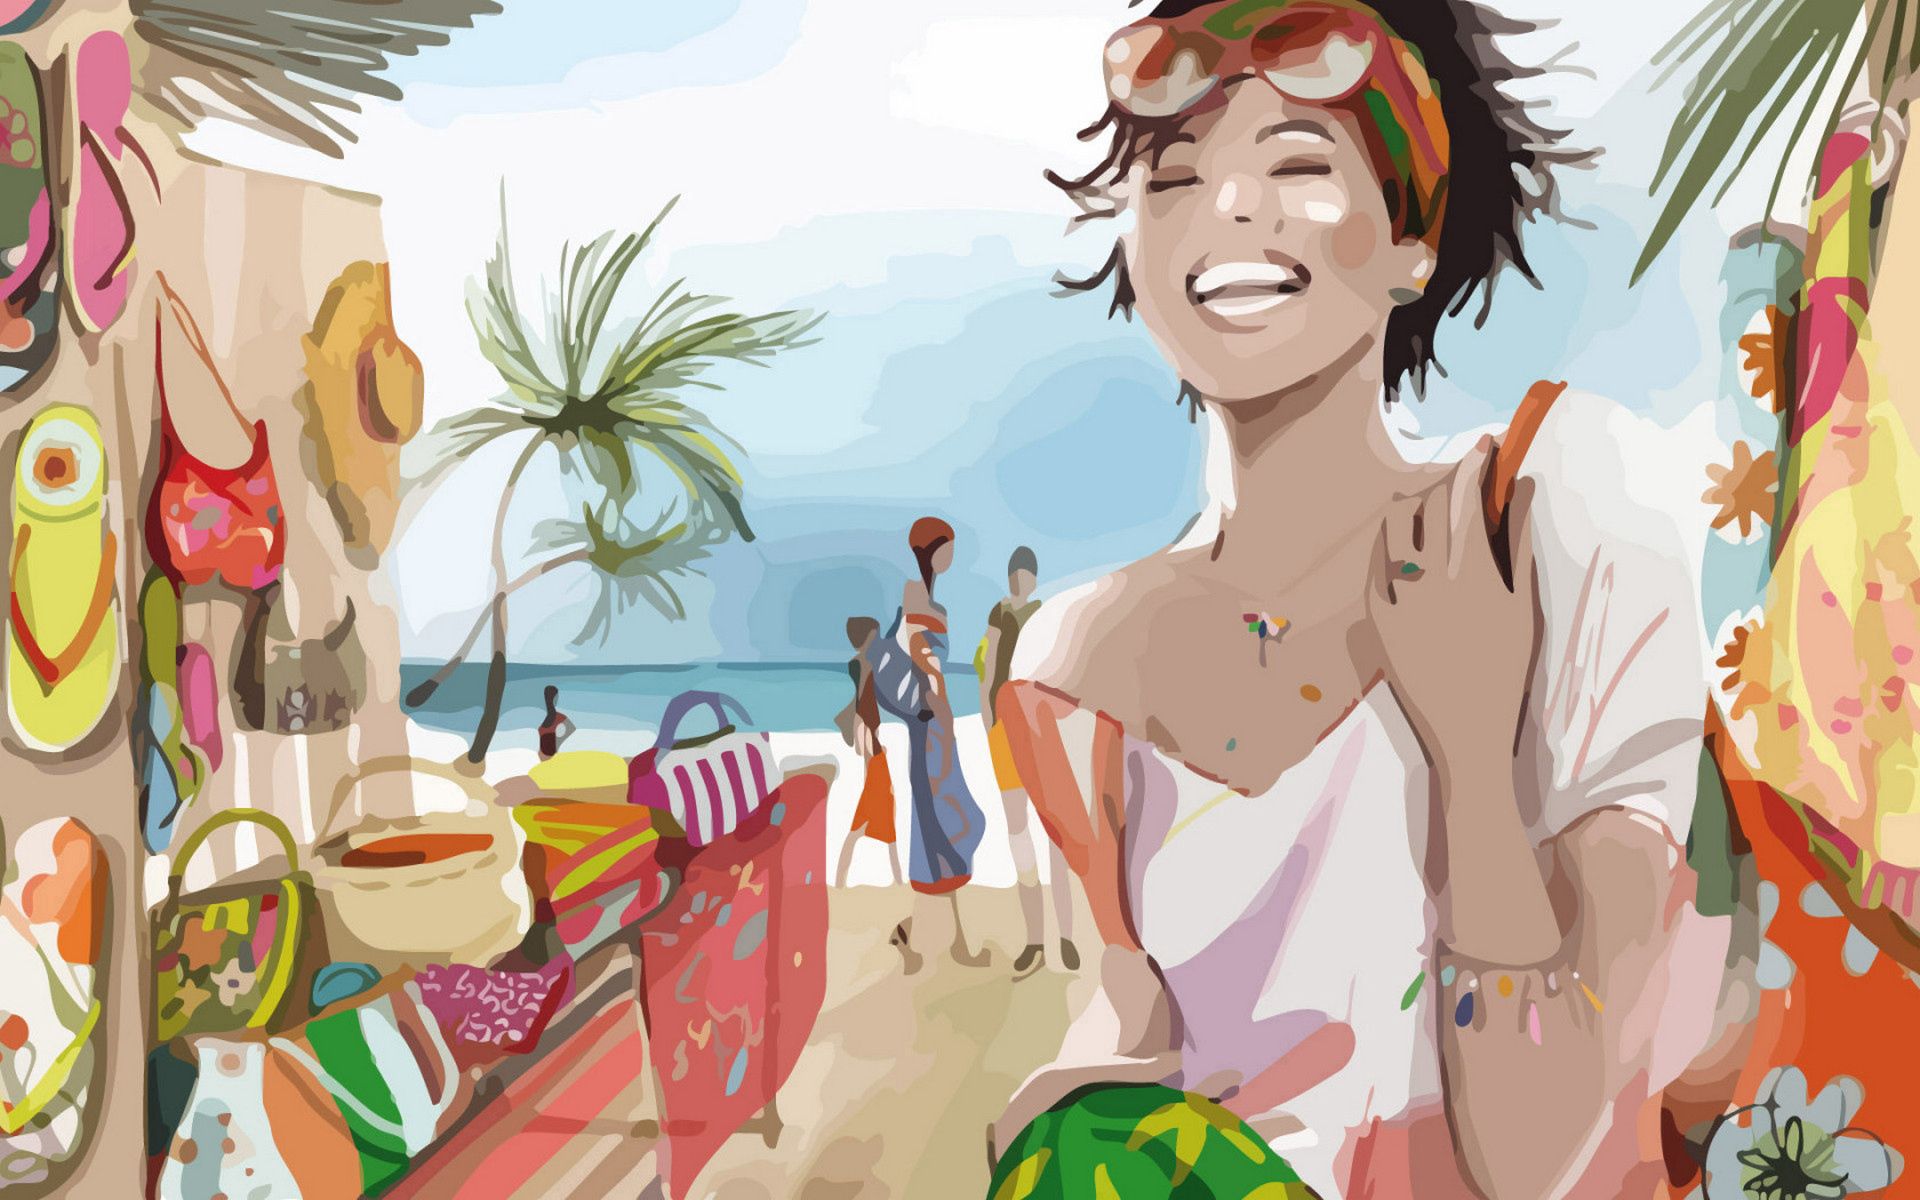 1920x1080 Background drawing, vector, beach, palms, paint, picture, relaxation, rest, smile, girl